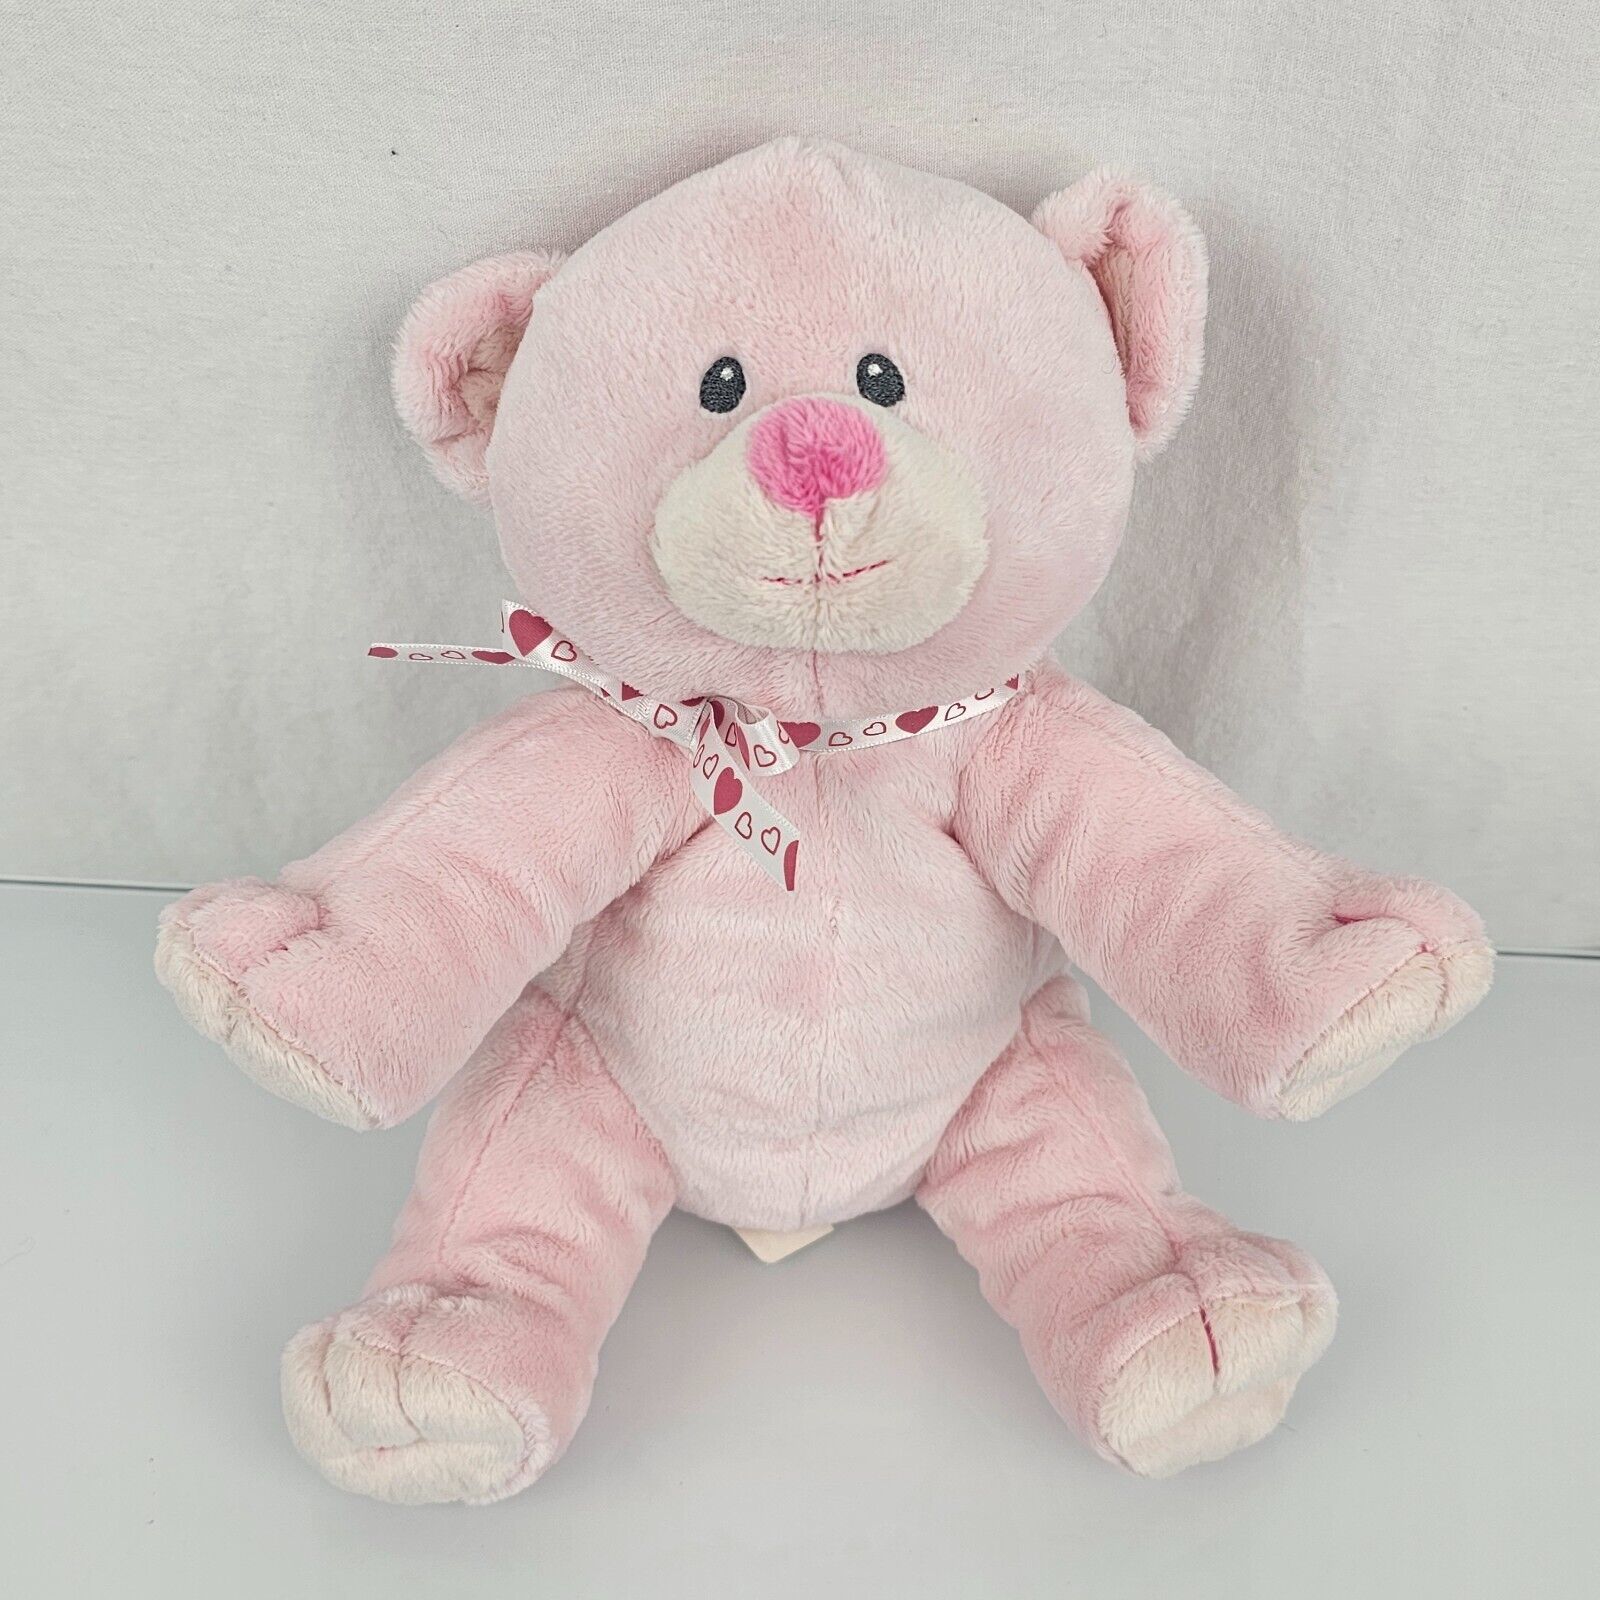 Ty Pluffies Amore Plush Pink Bear Lovey Stitched Eyes Soft Stuffed Toy Animal - $14.84